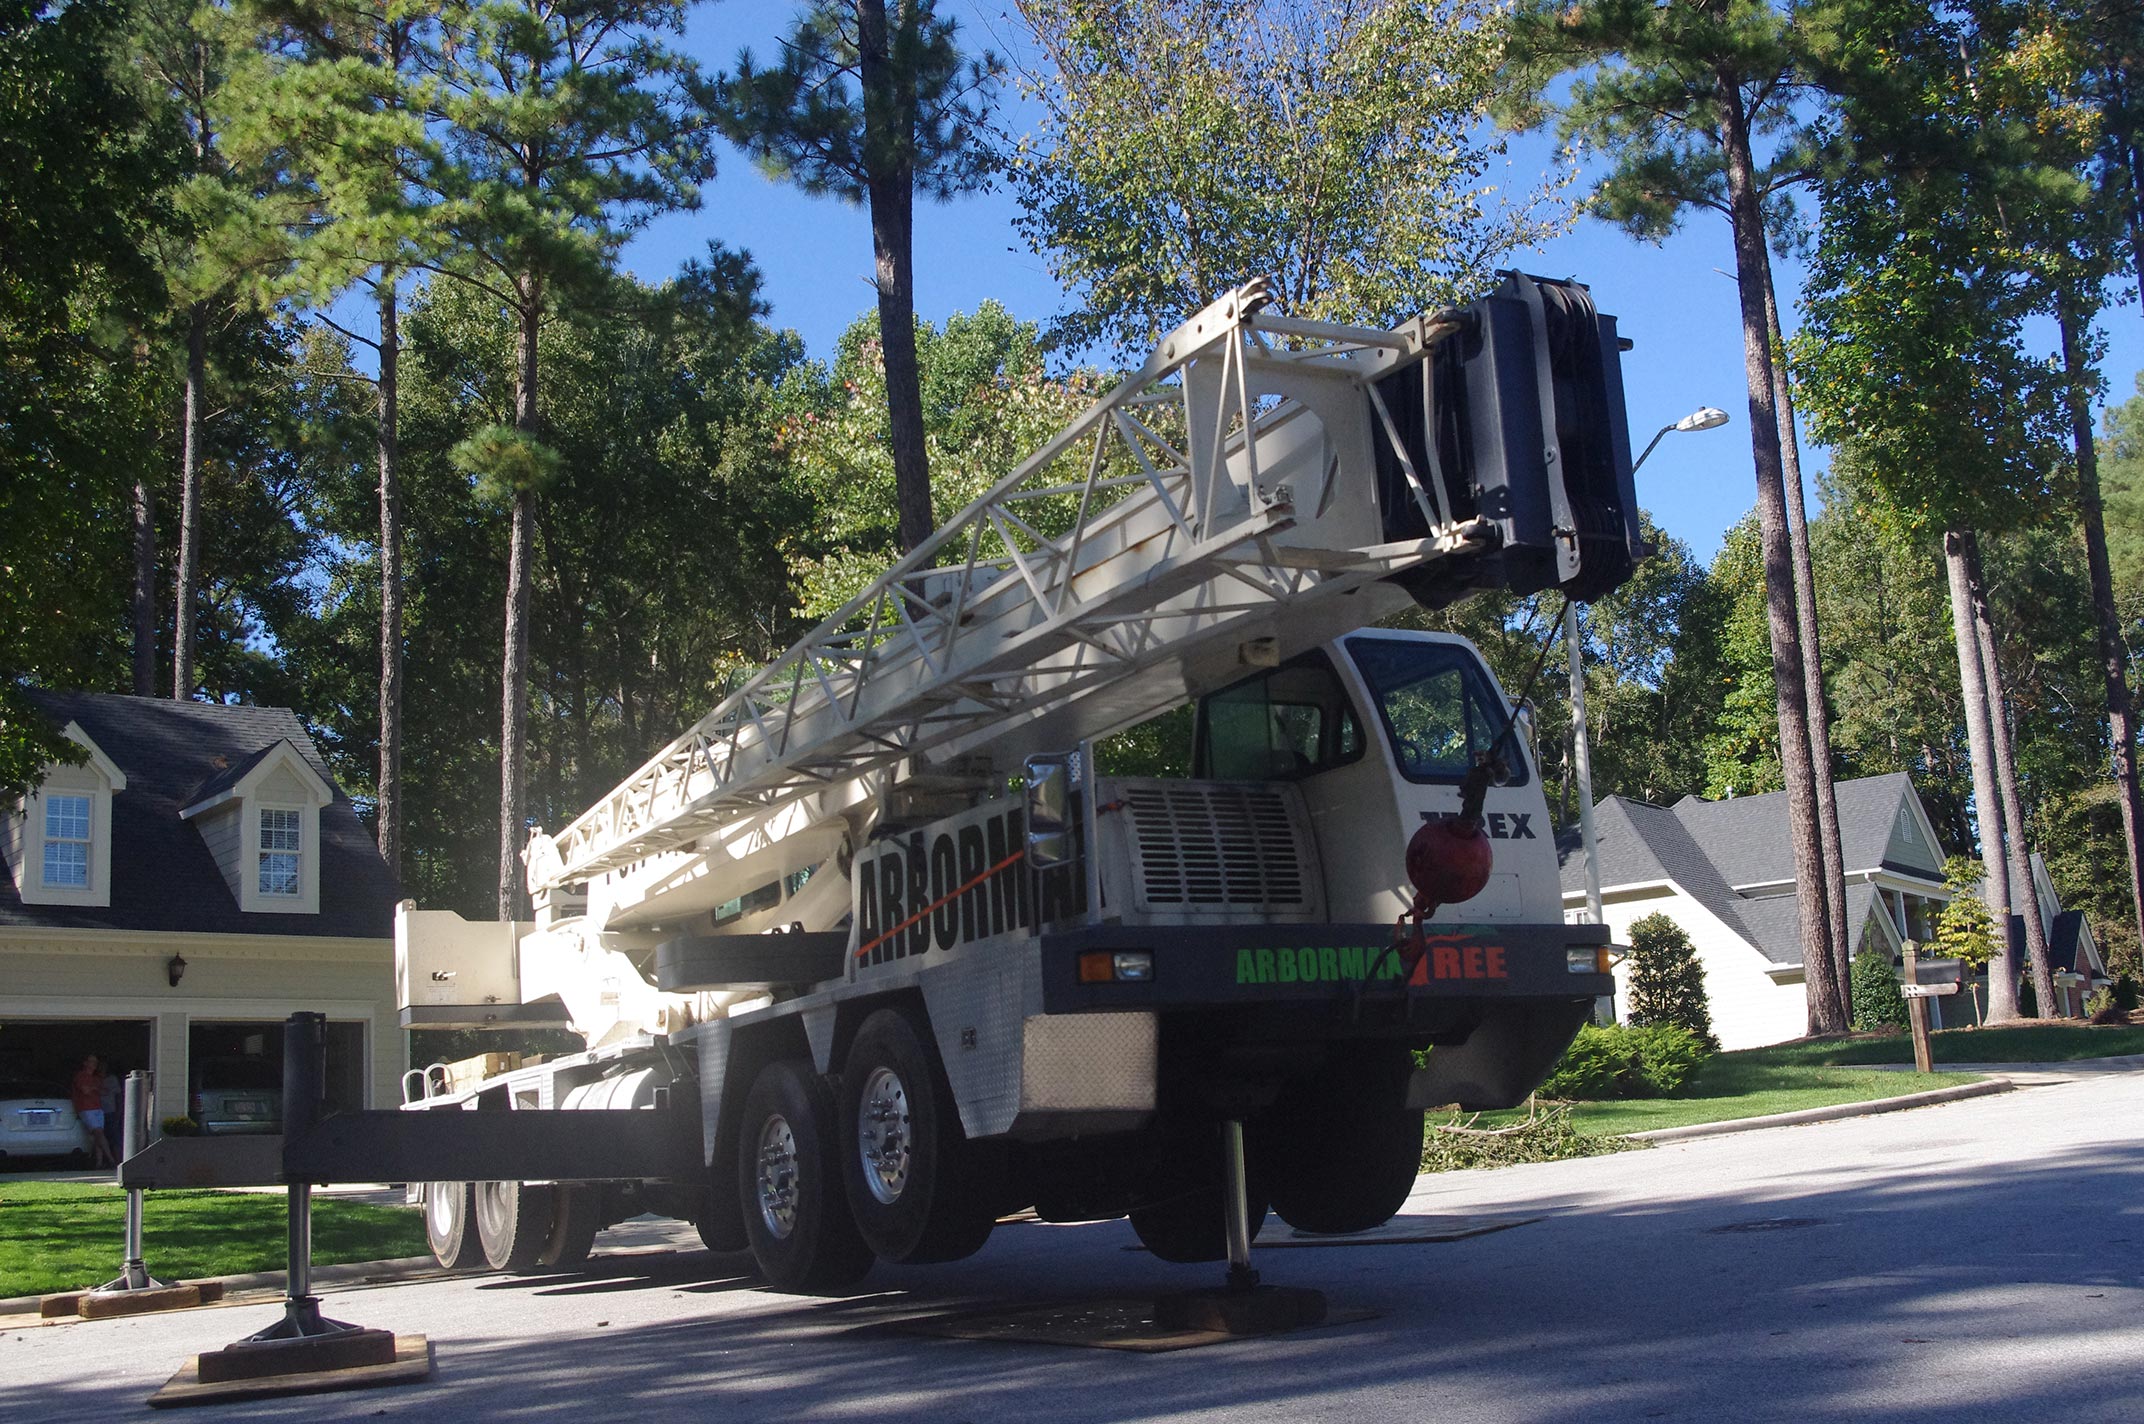 #crane-set-up-for-tree-removal